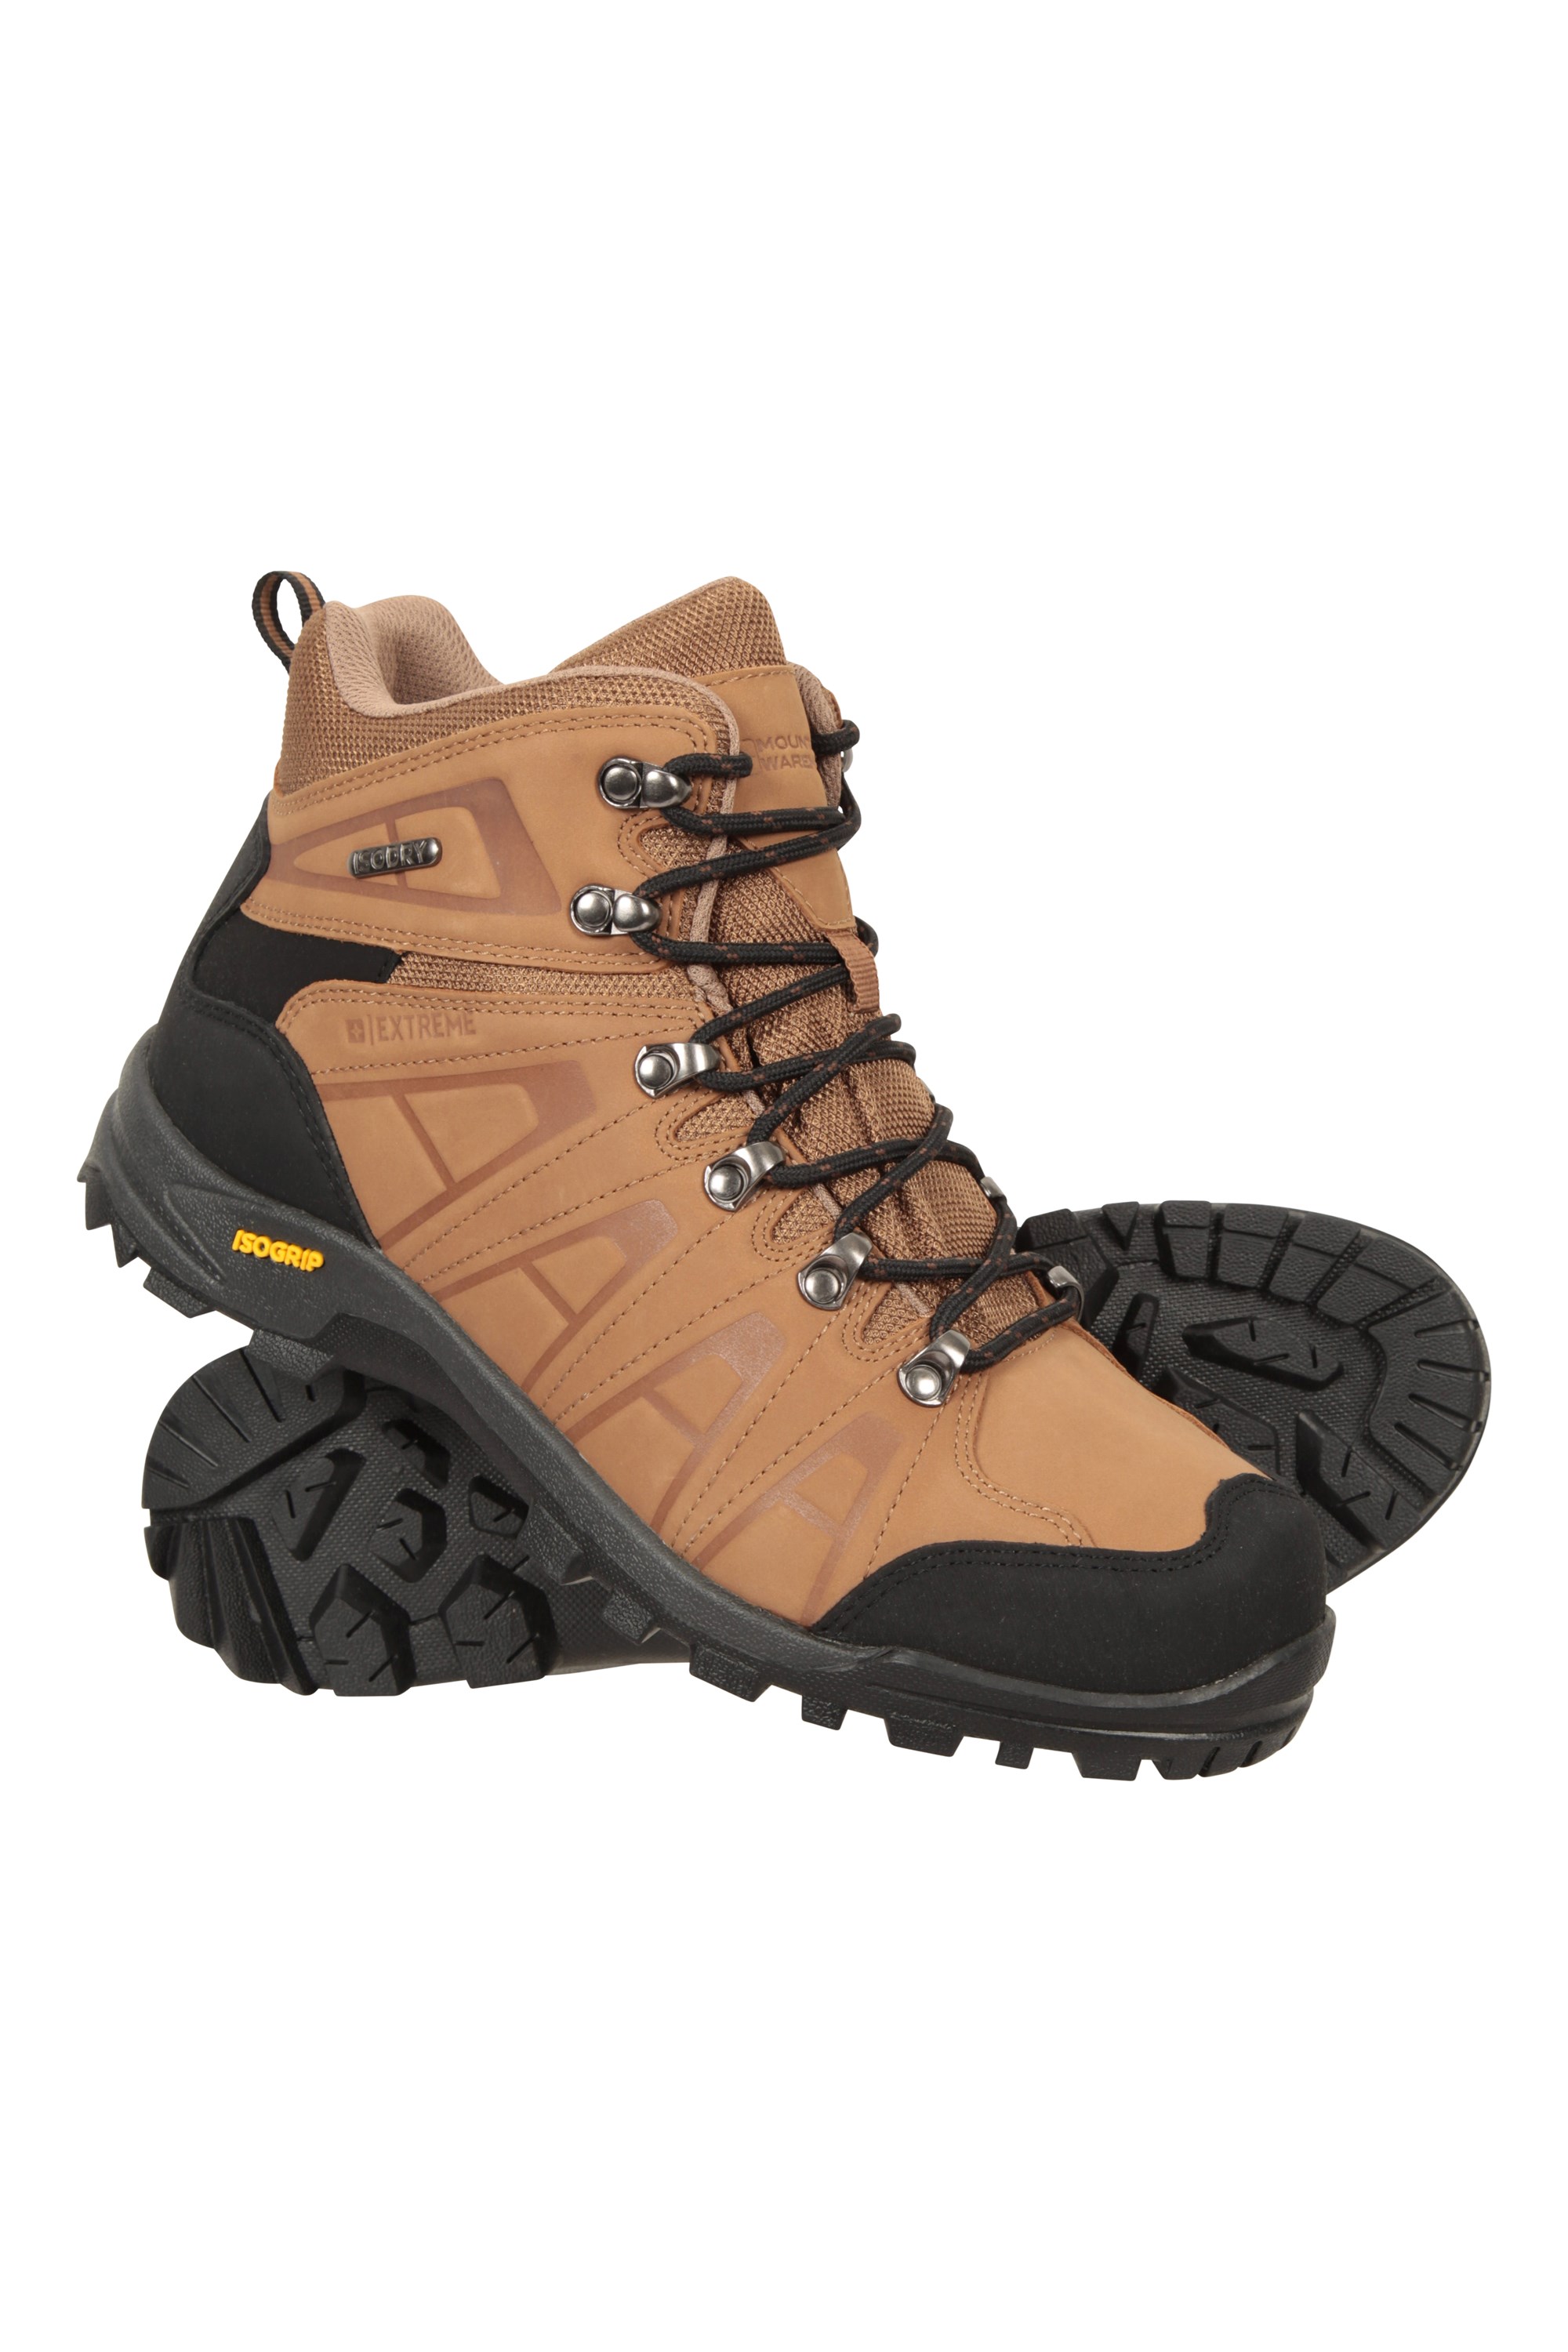 Hurricane Extreme Mens Waterproof IsoGrip Boots